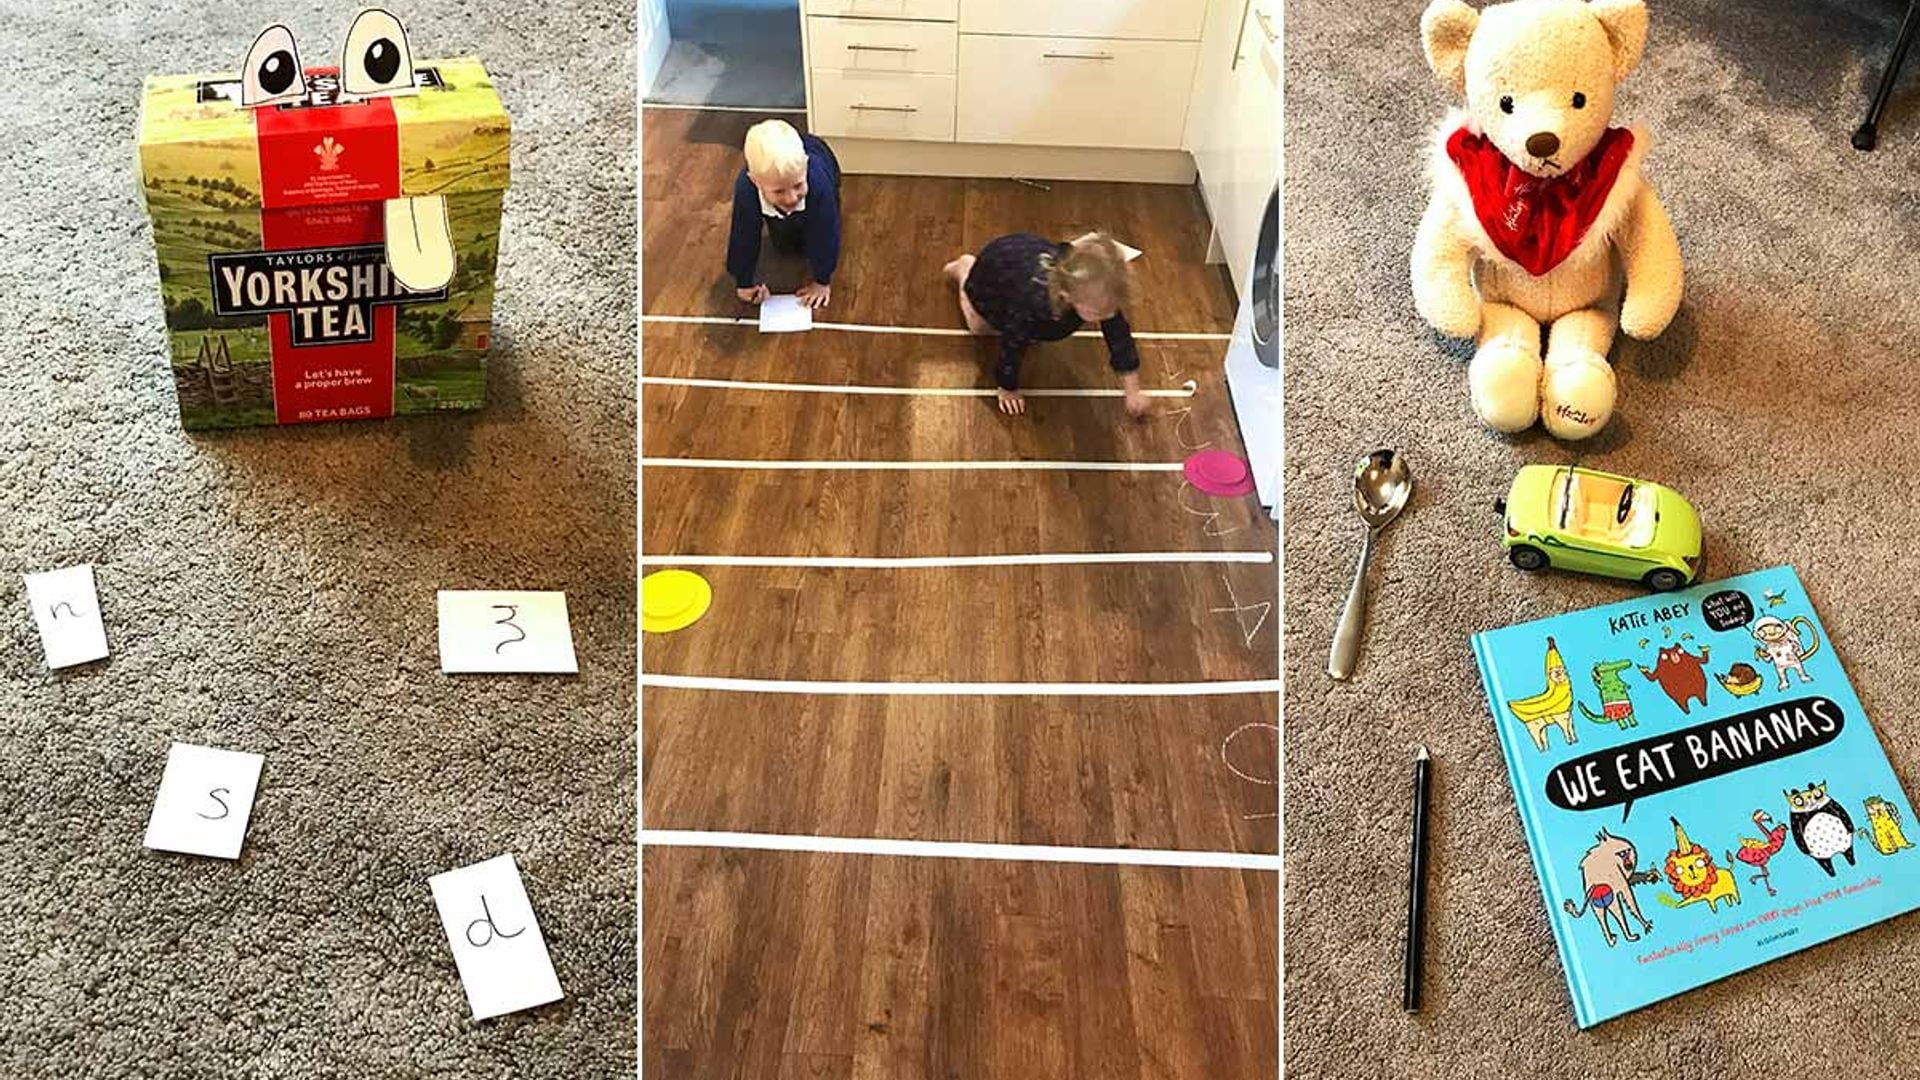 Self isolating this weekend? 3 fun games to play with the kids at home from Five Minute Mum